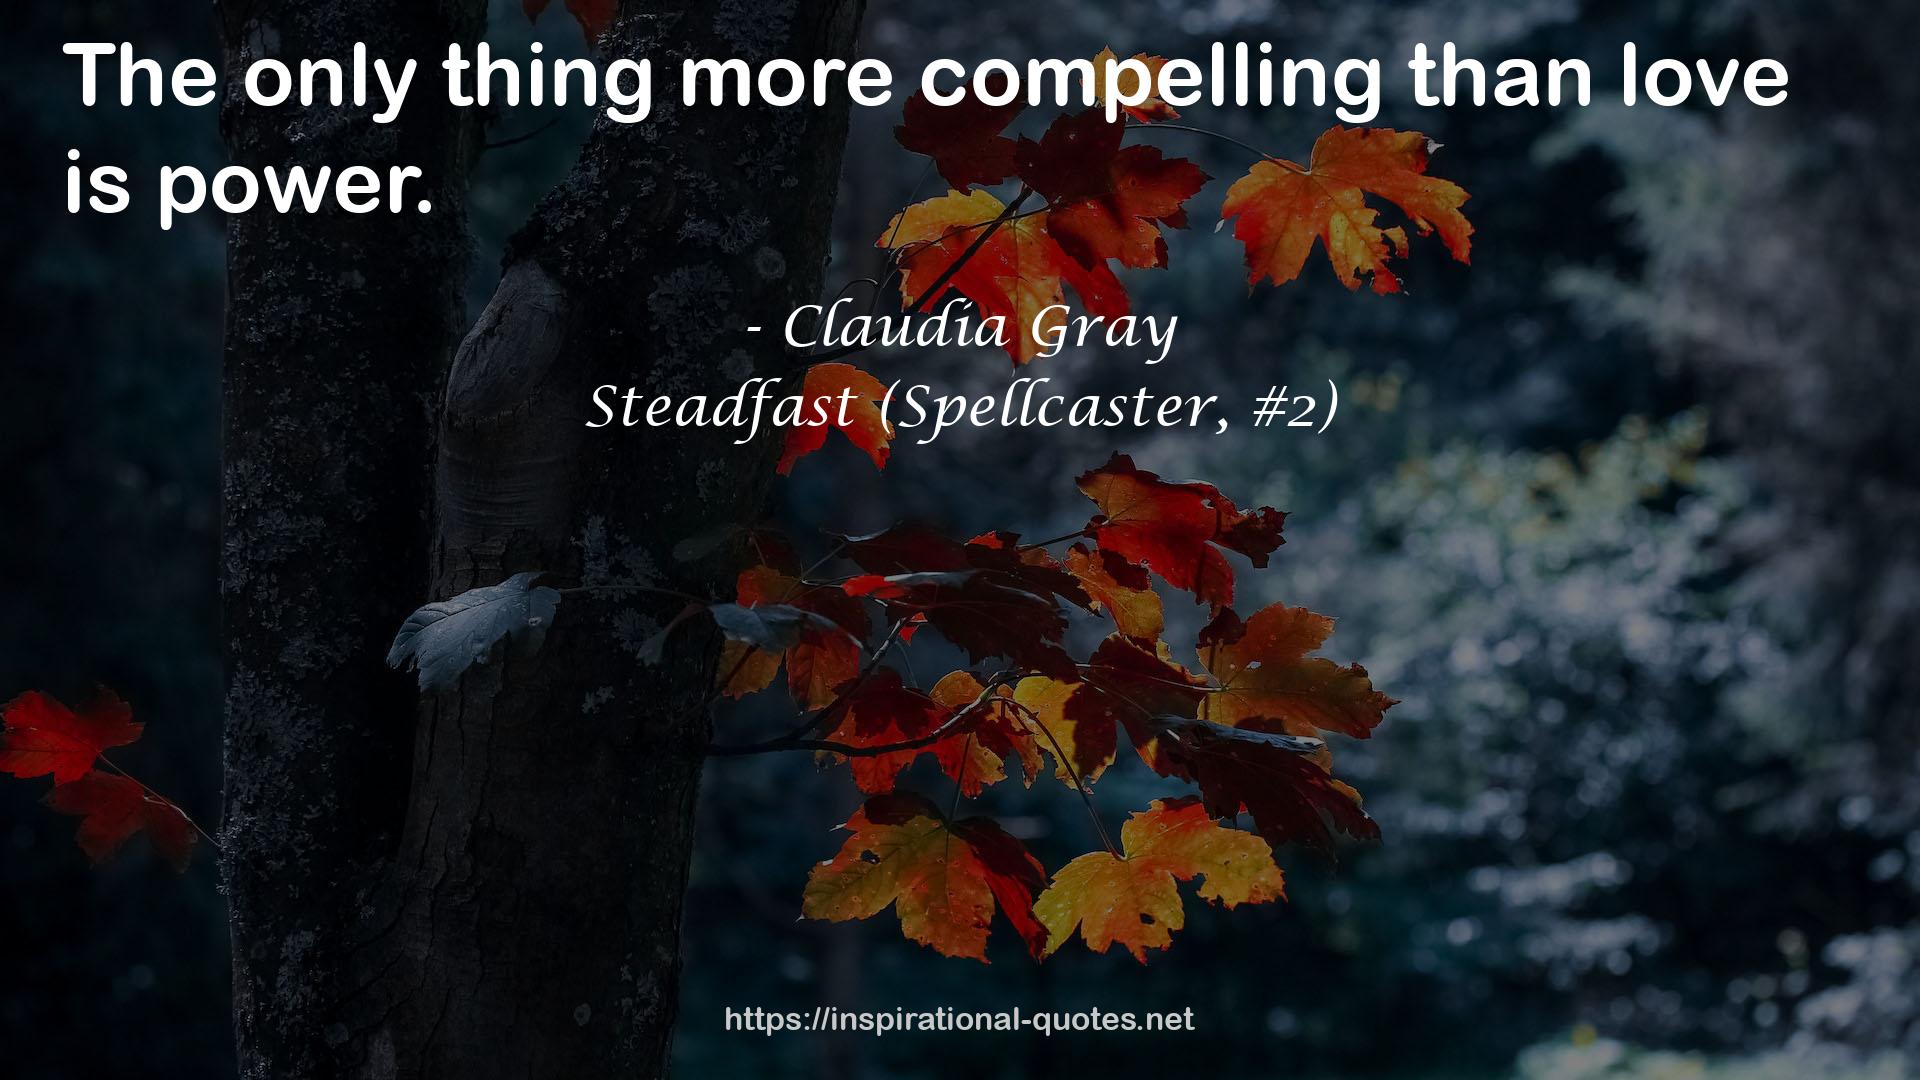 Steadfast (Spellcaster, #2) QUOTES